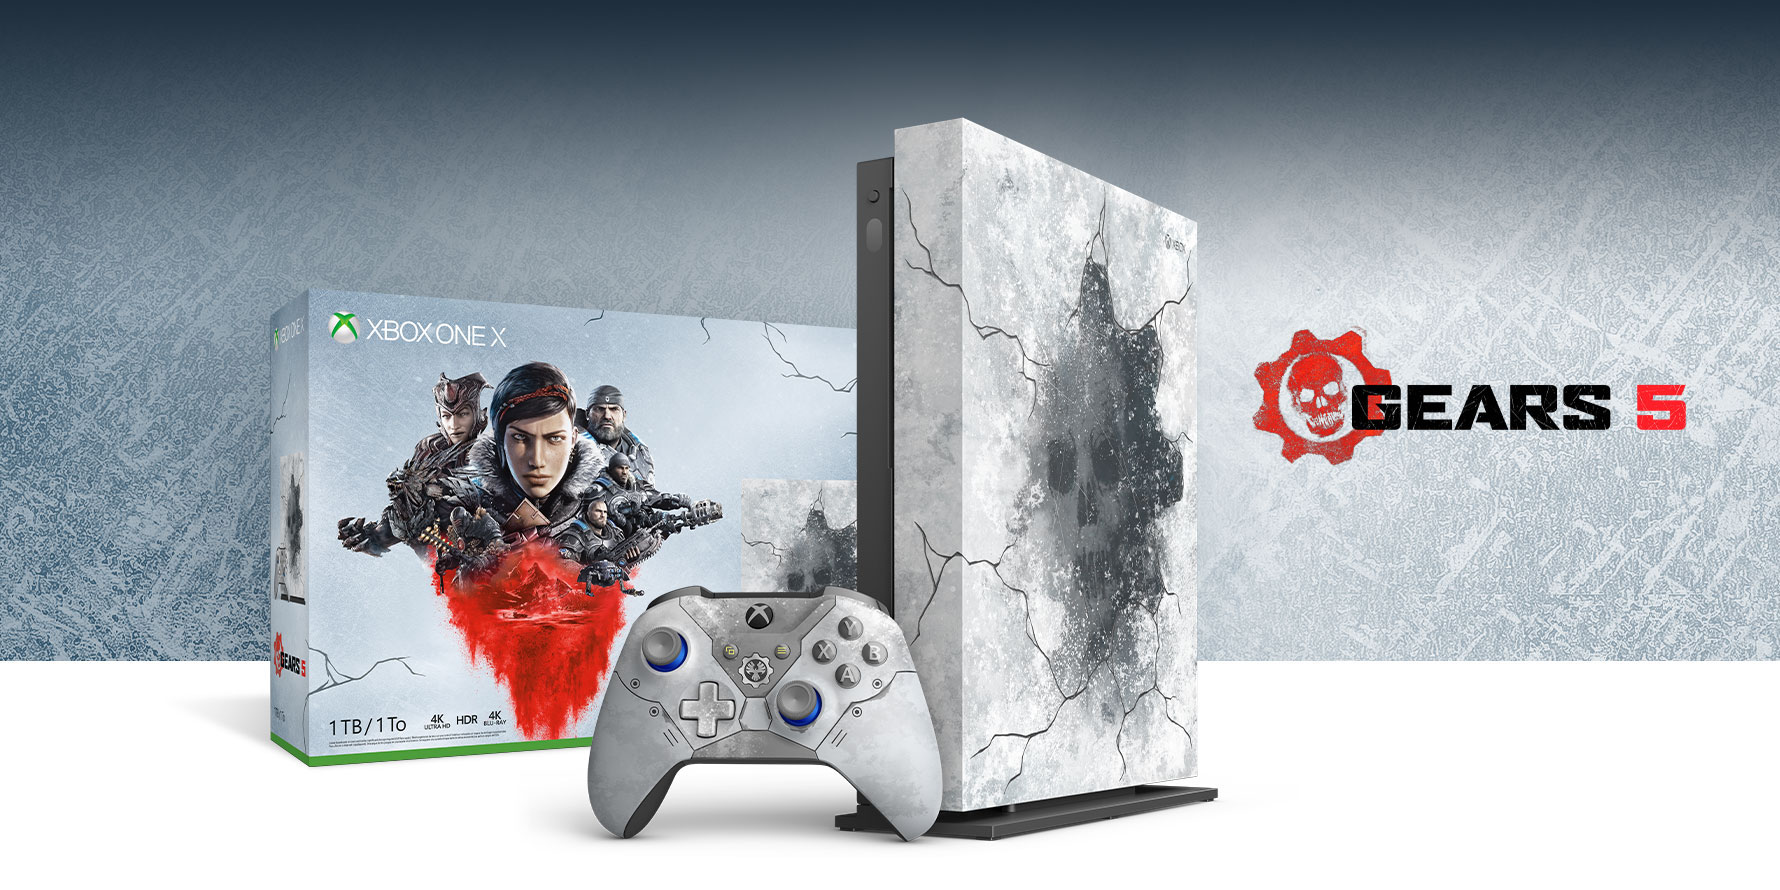 Microsoft Xbox One X 1TB Gears 5 Limited Edition with Wireless Controller  Manufacturer Refurbished